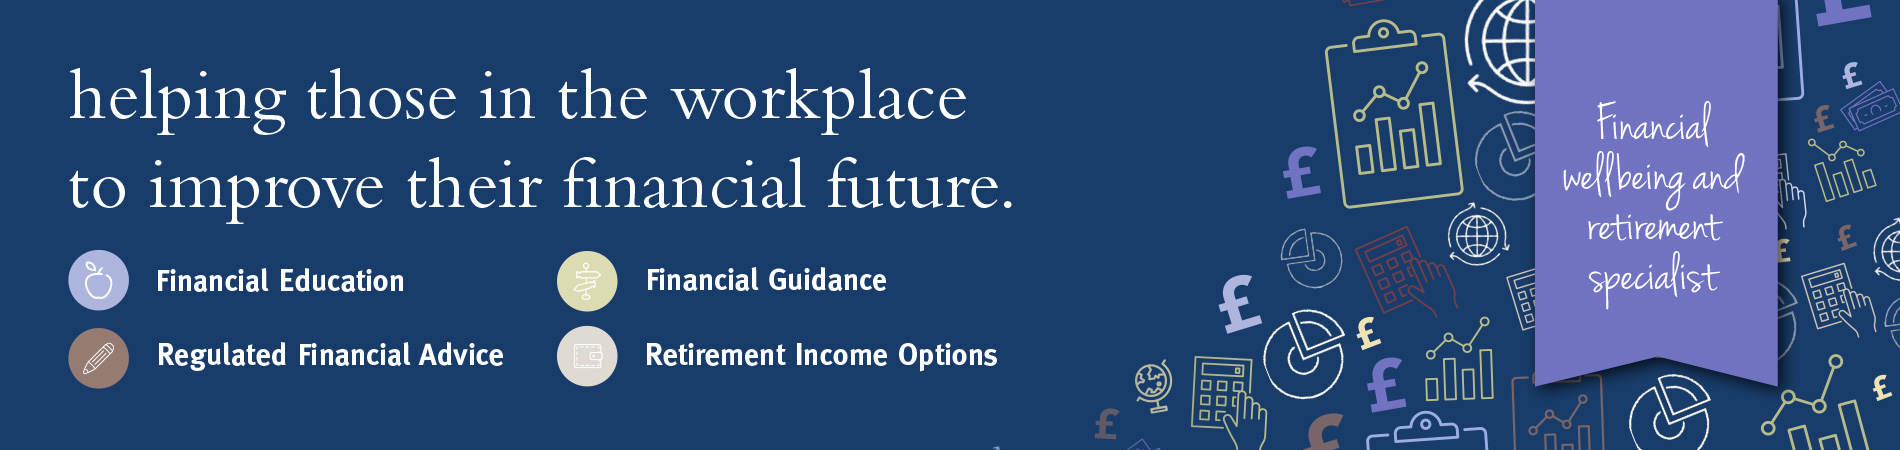 helping those in the workplace to improve their financial future